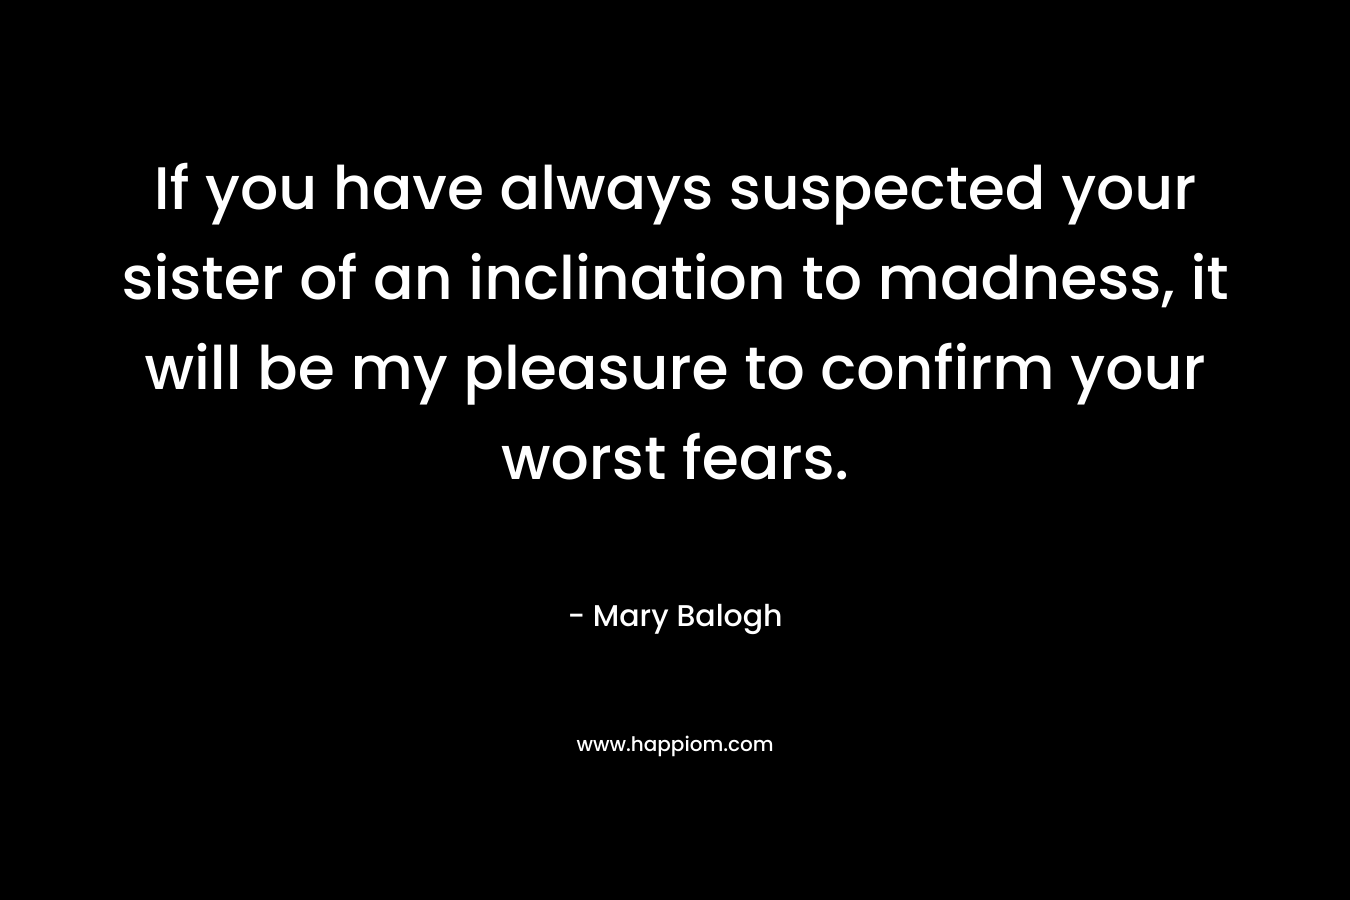 If you have always suspected your sister of an inclination to madness, it will be my pleasure to confirm your worst fears.